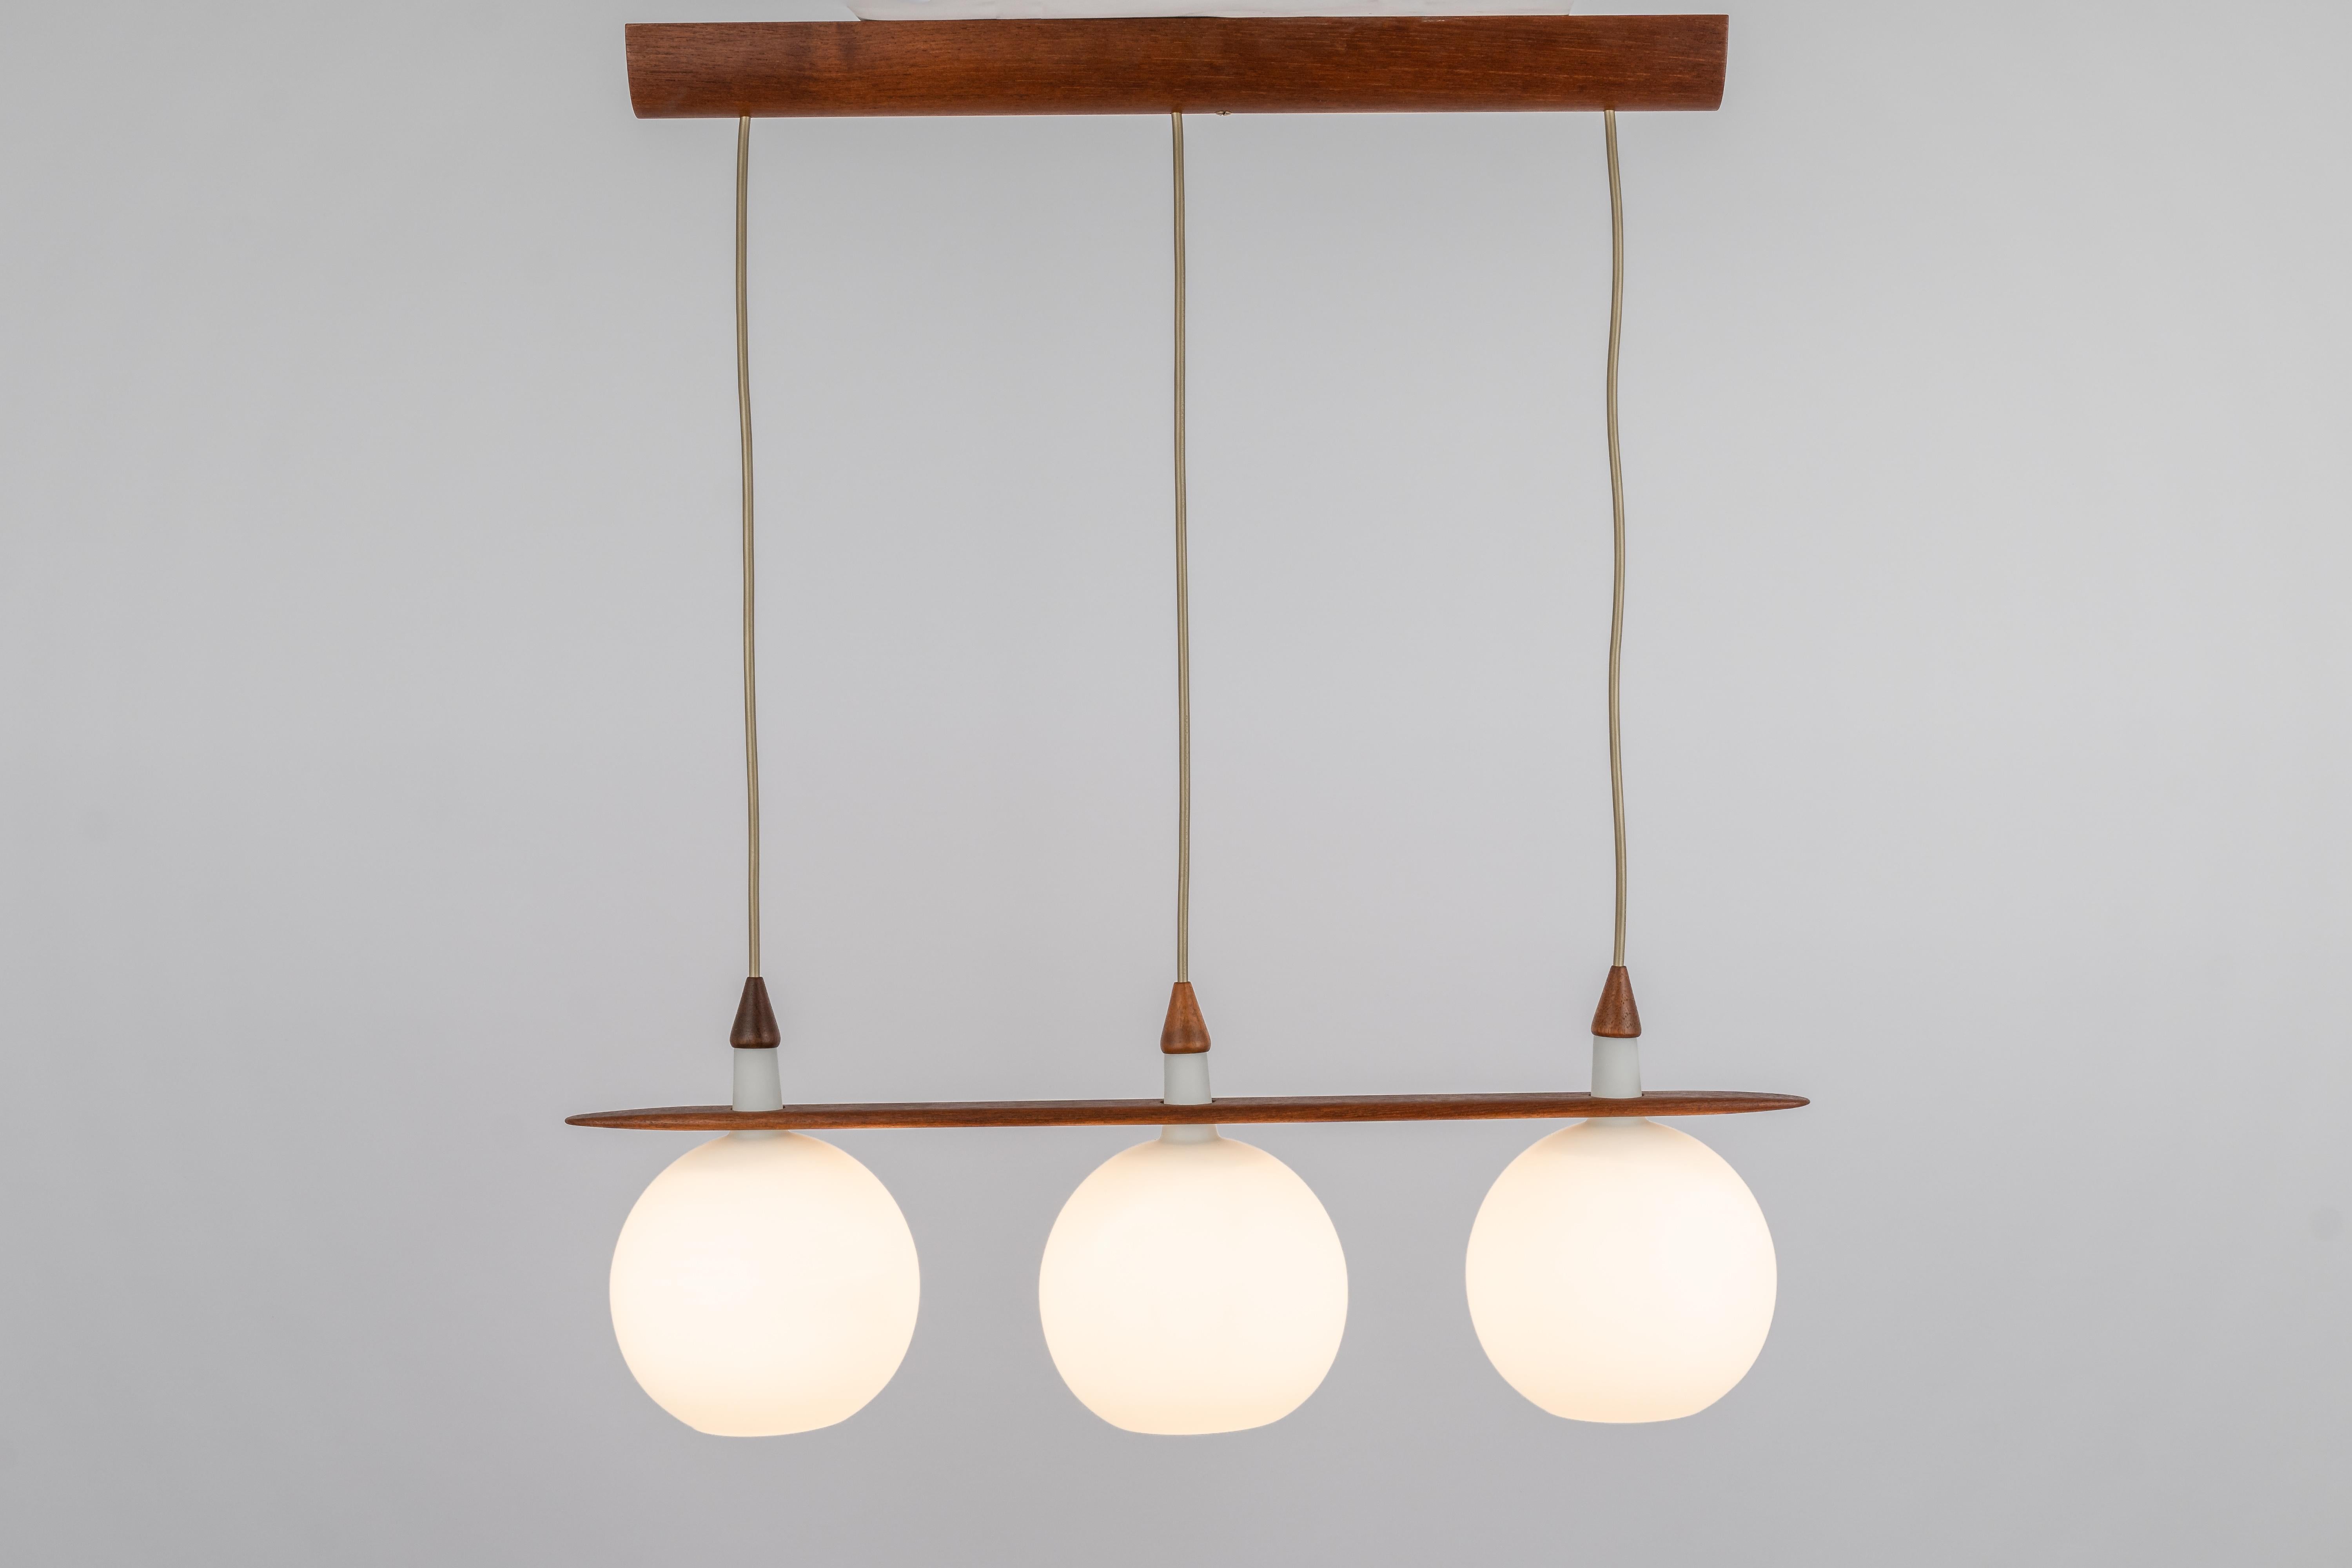 Mid-20th Century Minimalistic Teak and Opal Glass Pendant by Uno & Östen Kristiansson, 1960s For Sale